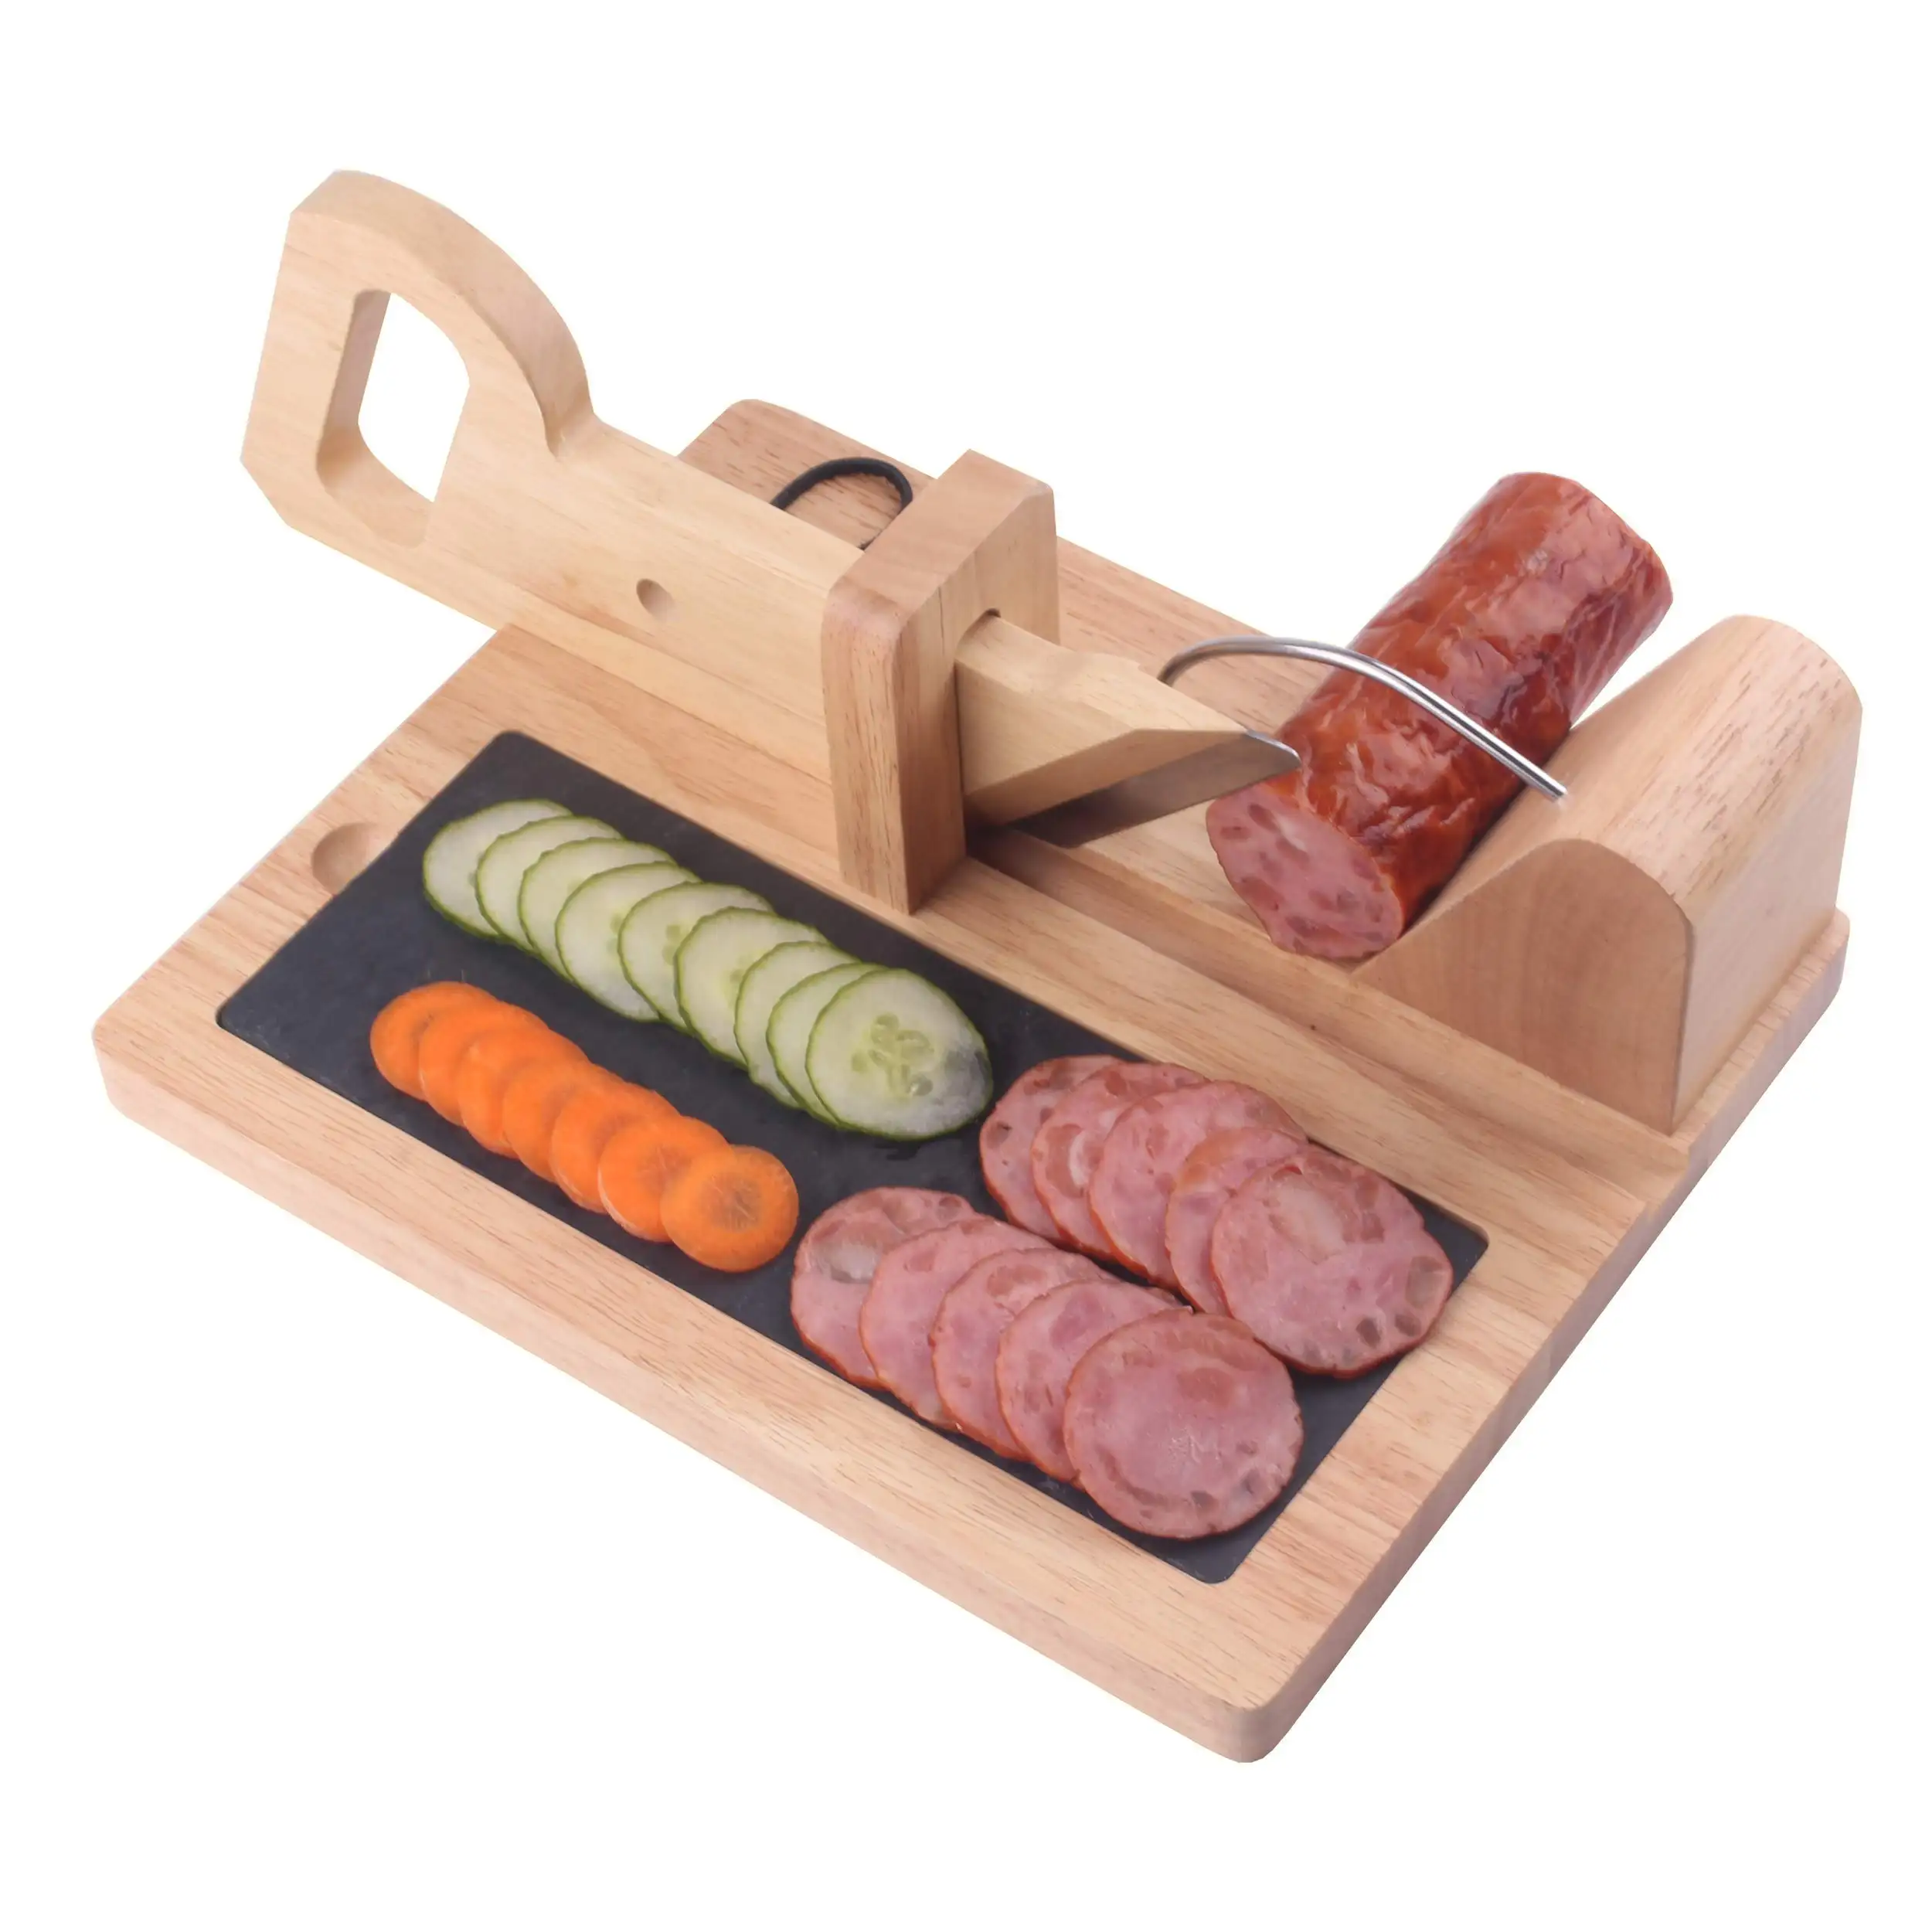 Rustic Wood Guillotine Slicer Sausage Cutter Sharp Stainless Steel Blade For Slicing Chorizo With Child Safety Lock